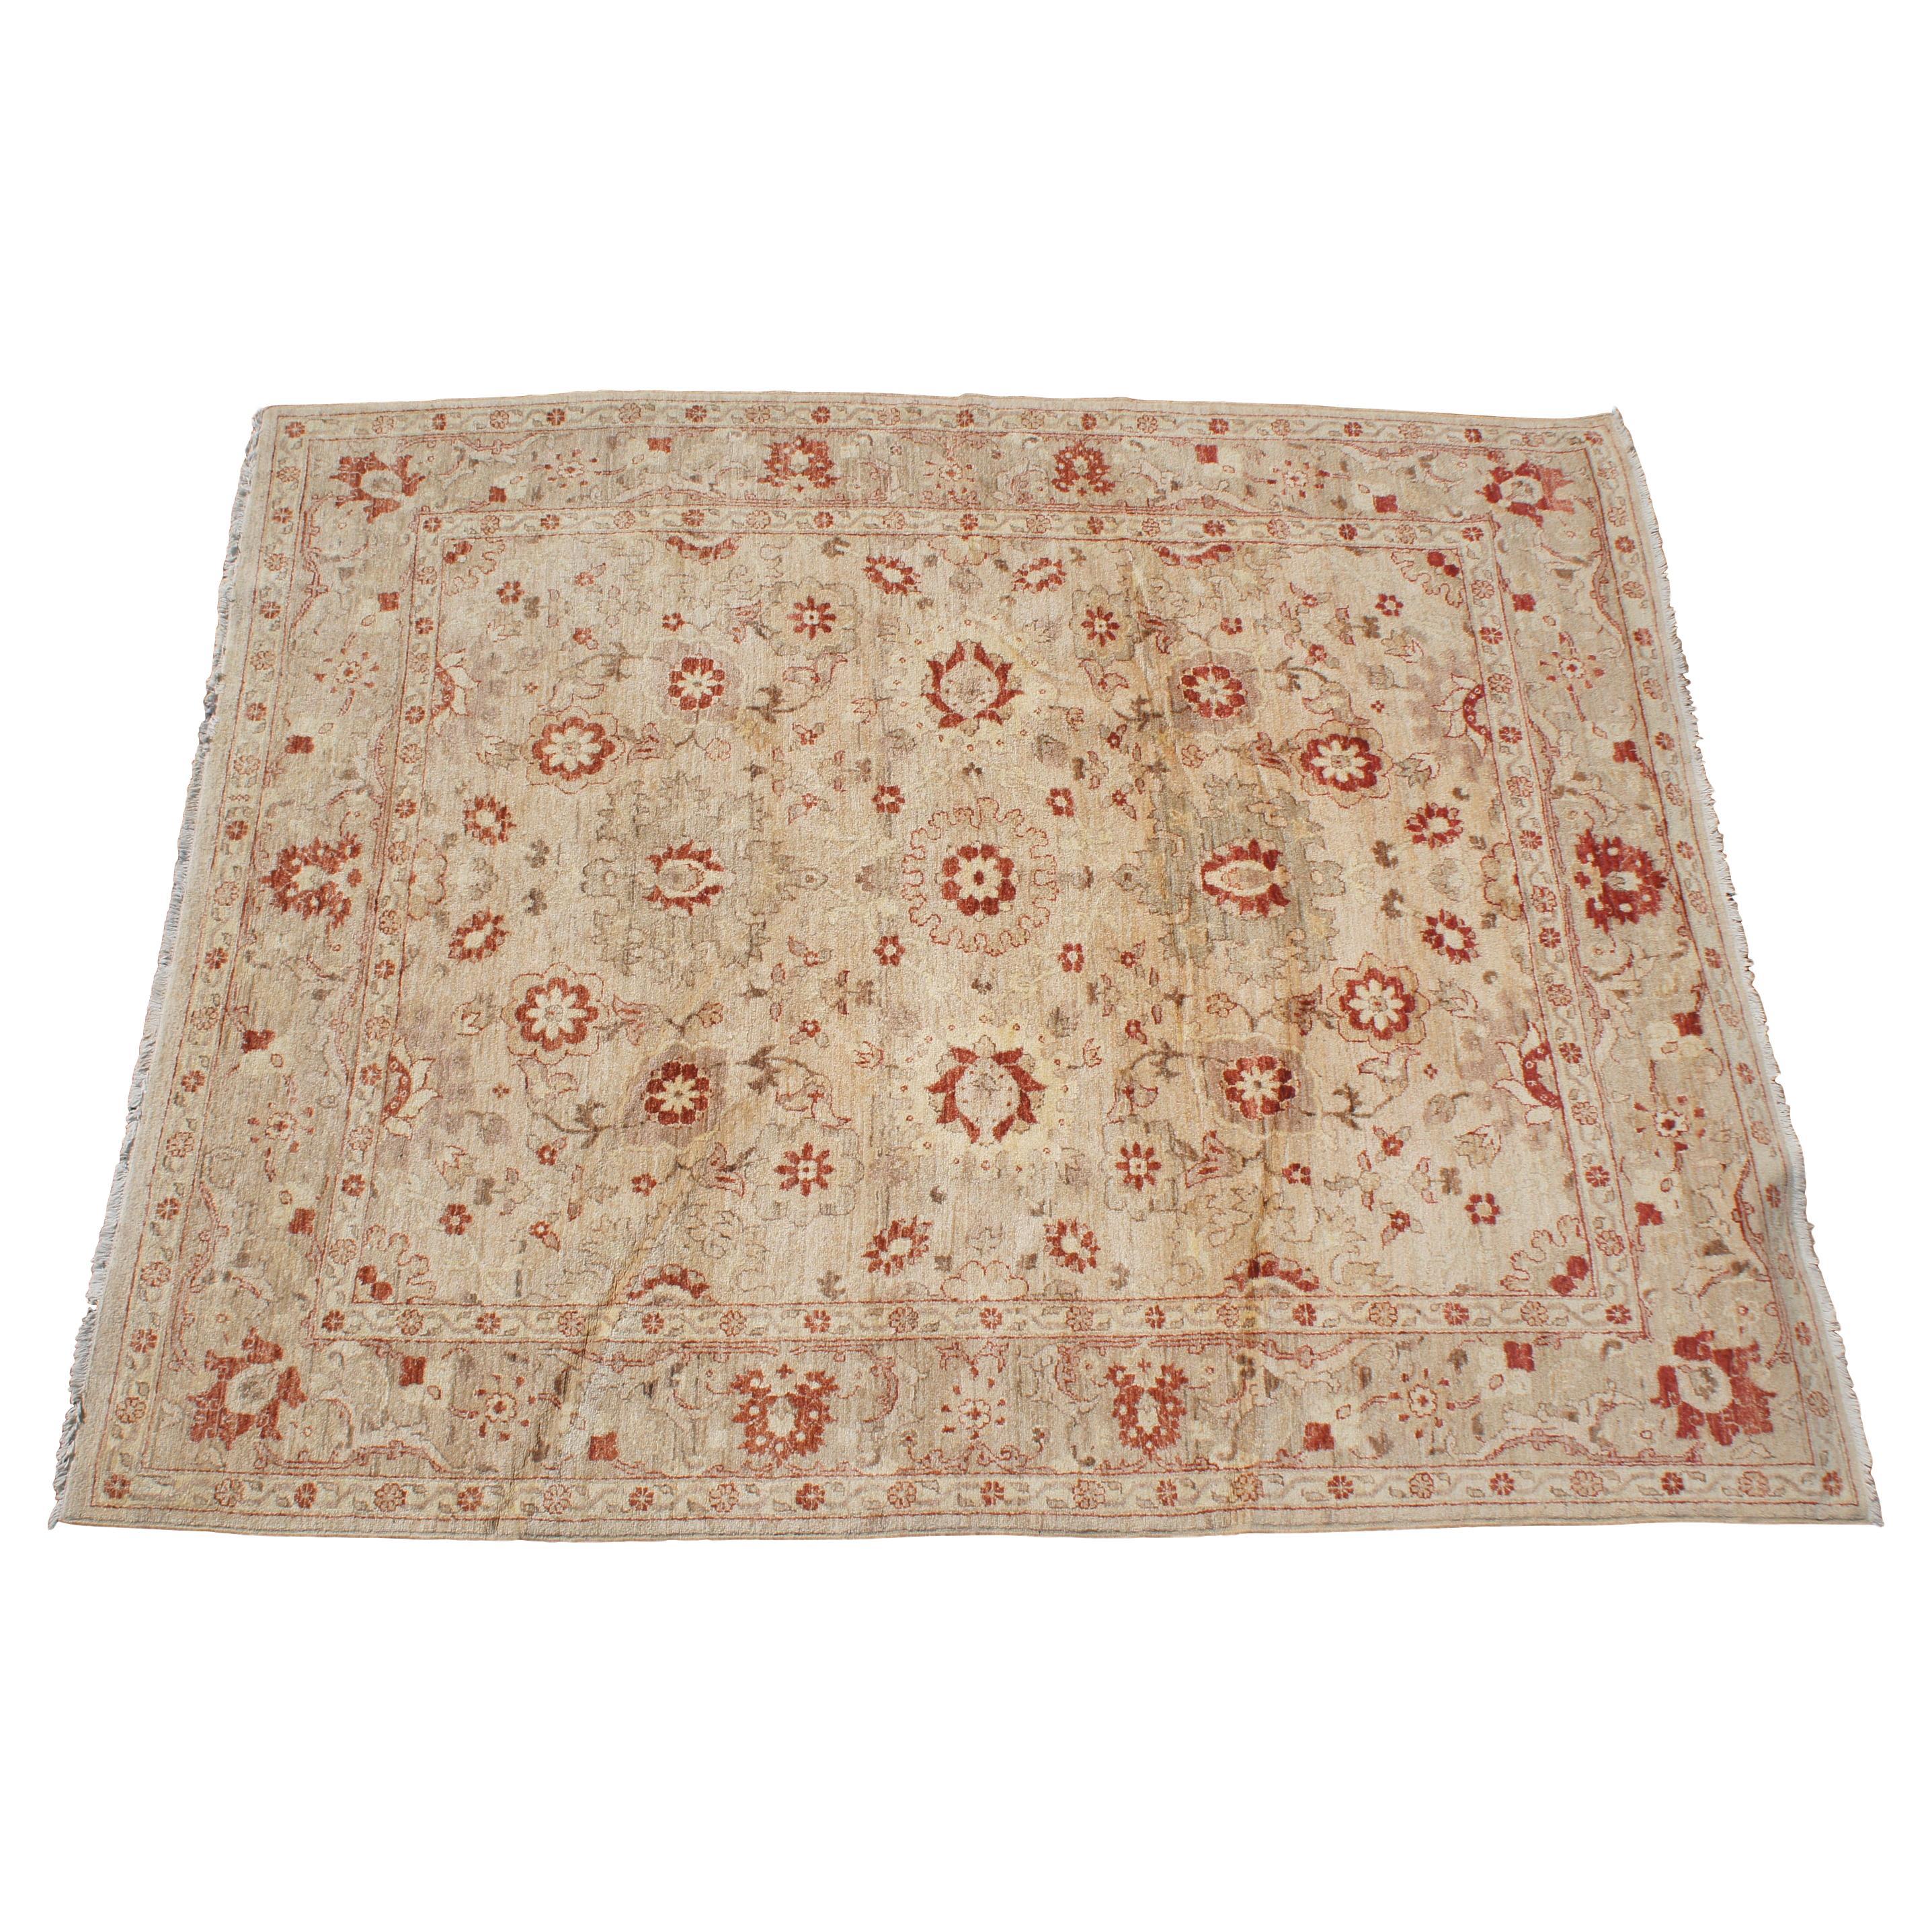 Hand Woven Pakistani Peshawar Red & Beige Floral Carpet Wool Area Rug 8' x 10' For Sale